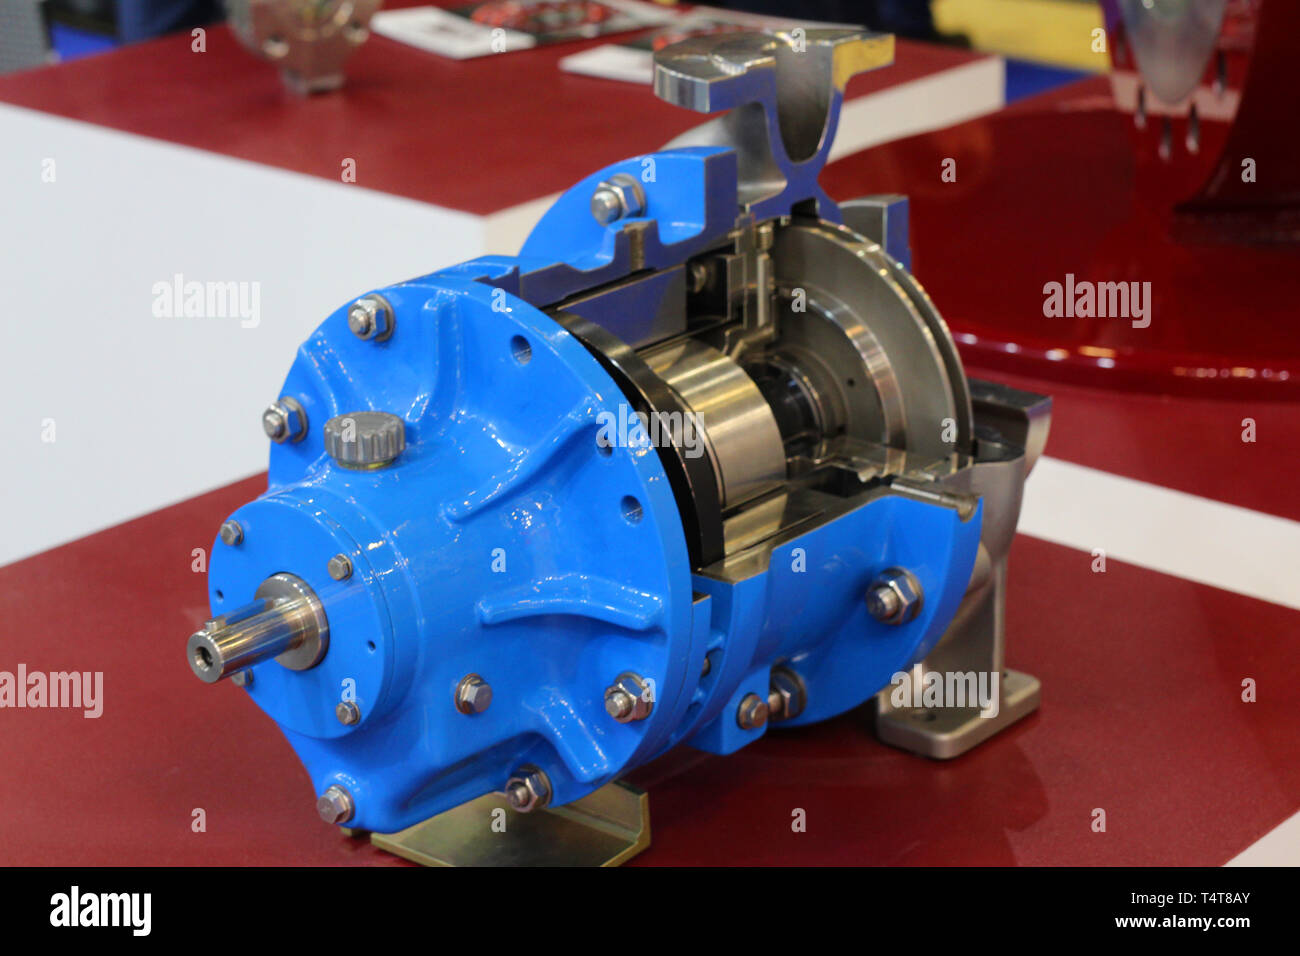 Centrifugal Pump with Magnet Drive. The pump is shown in section. Modular pump design for the petrochemical, oil and gas industry. Stock Photo